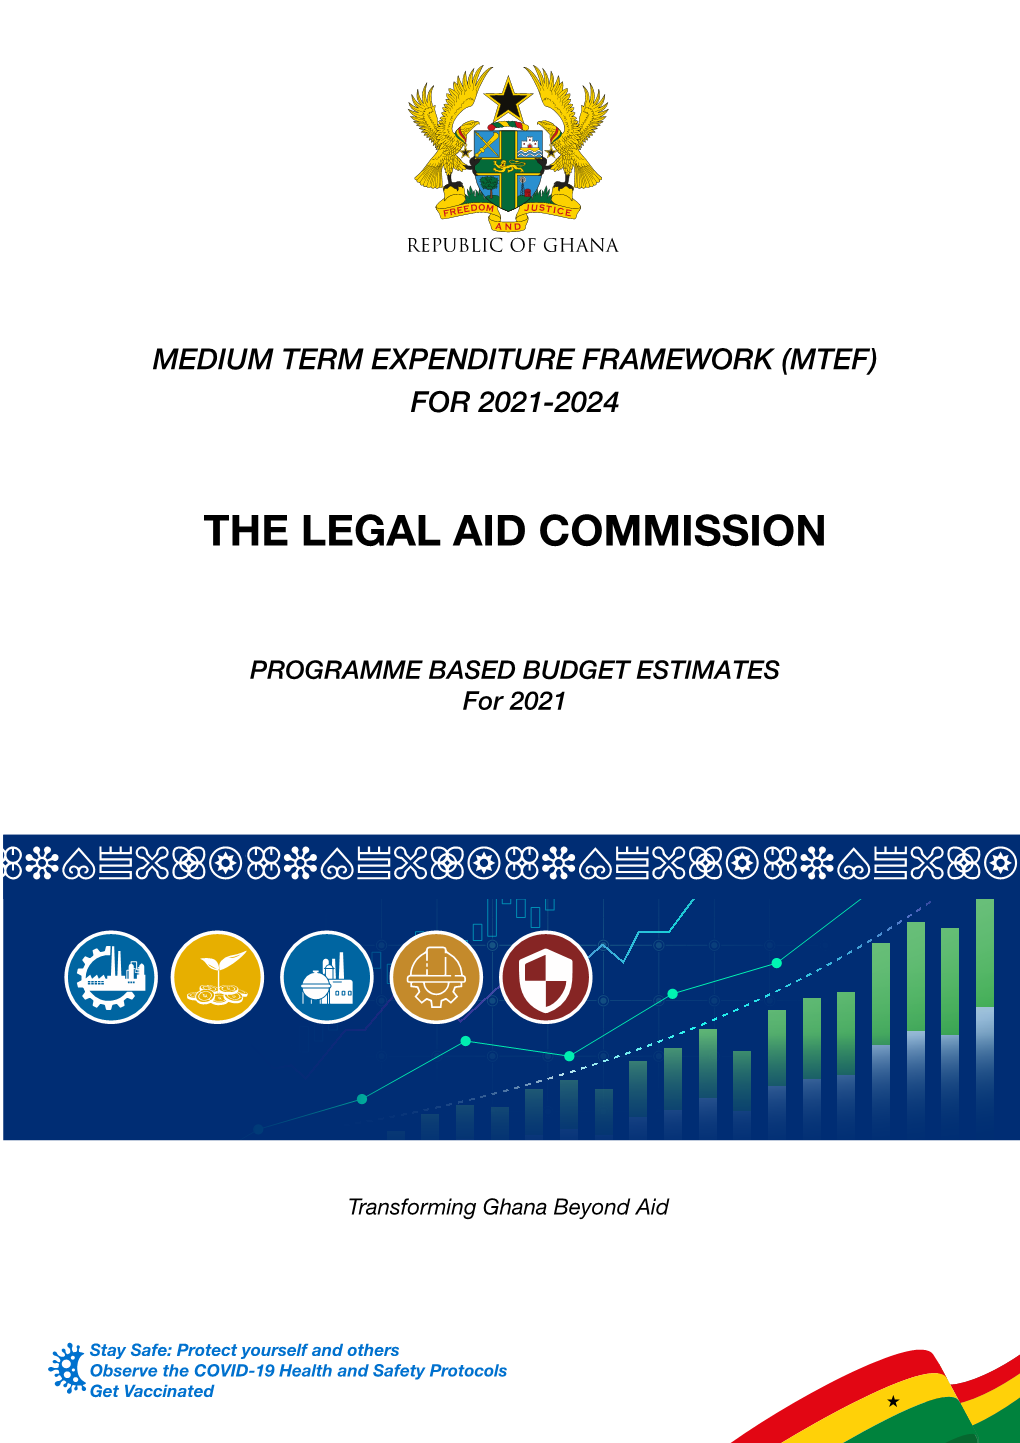 The Legal Aid Commission